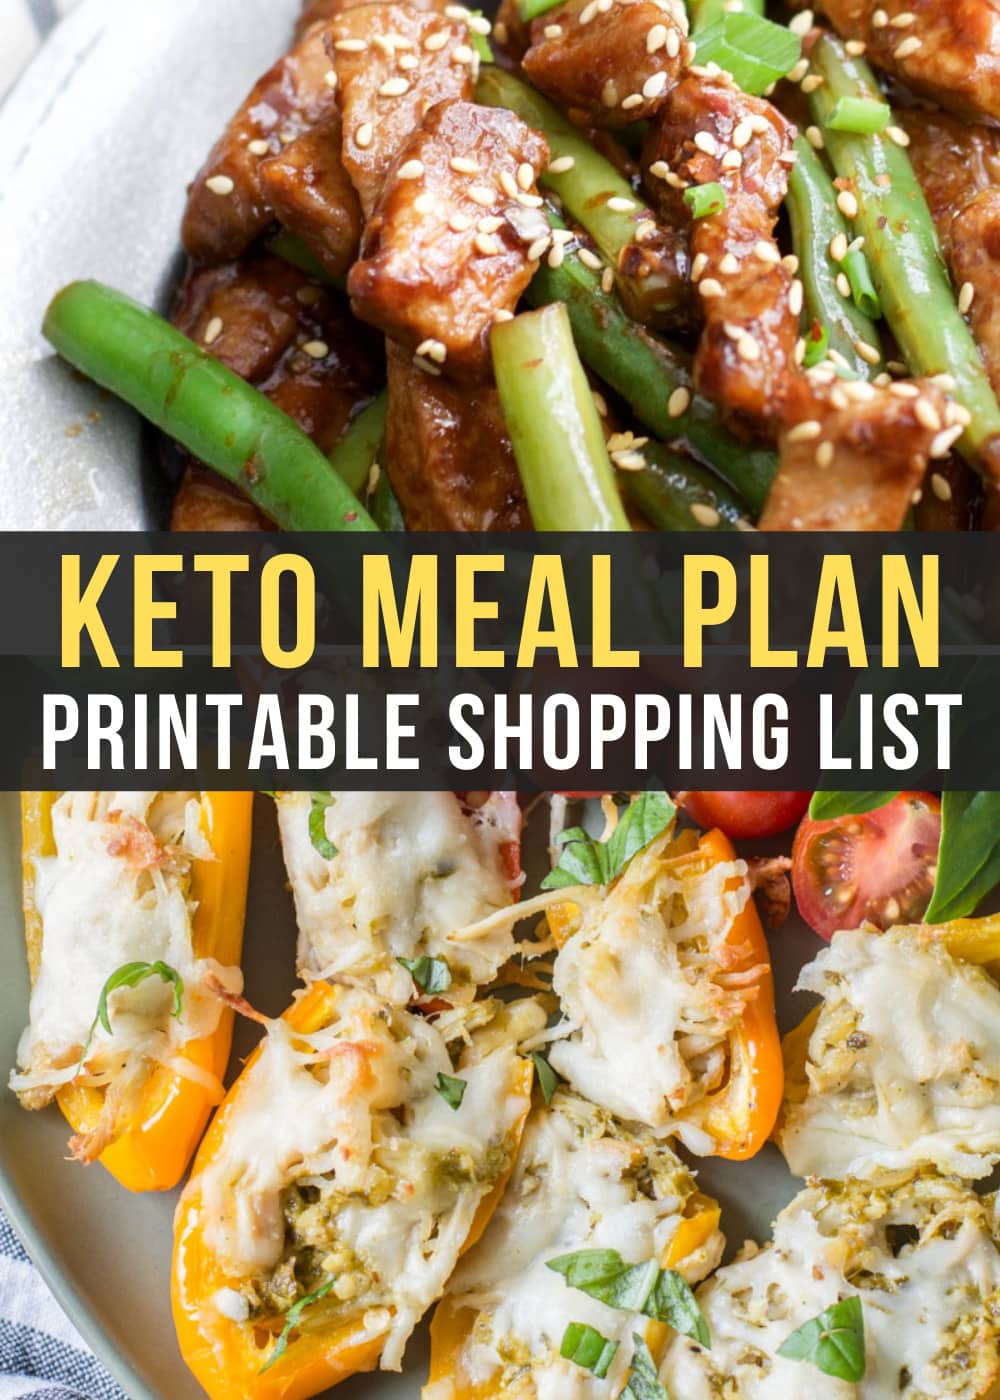 Week 14 of Easy Keto Meal Plan includes low carb Sesame Pork and Green Beans as well as Chicken Pesto Stuffed Sweet Peppers!